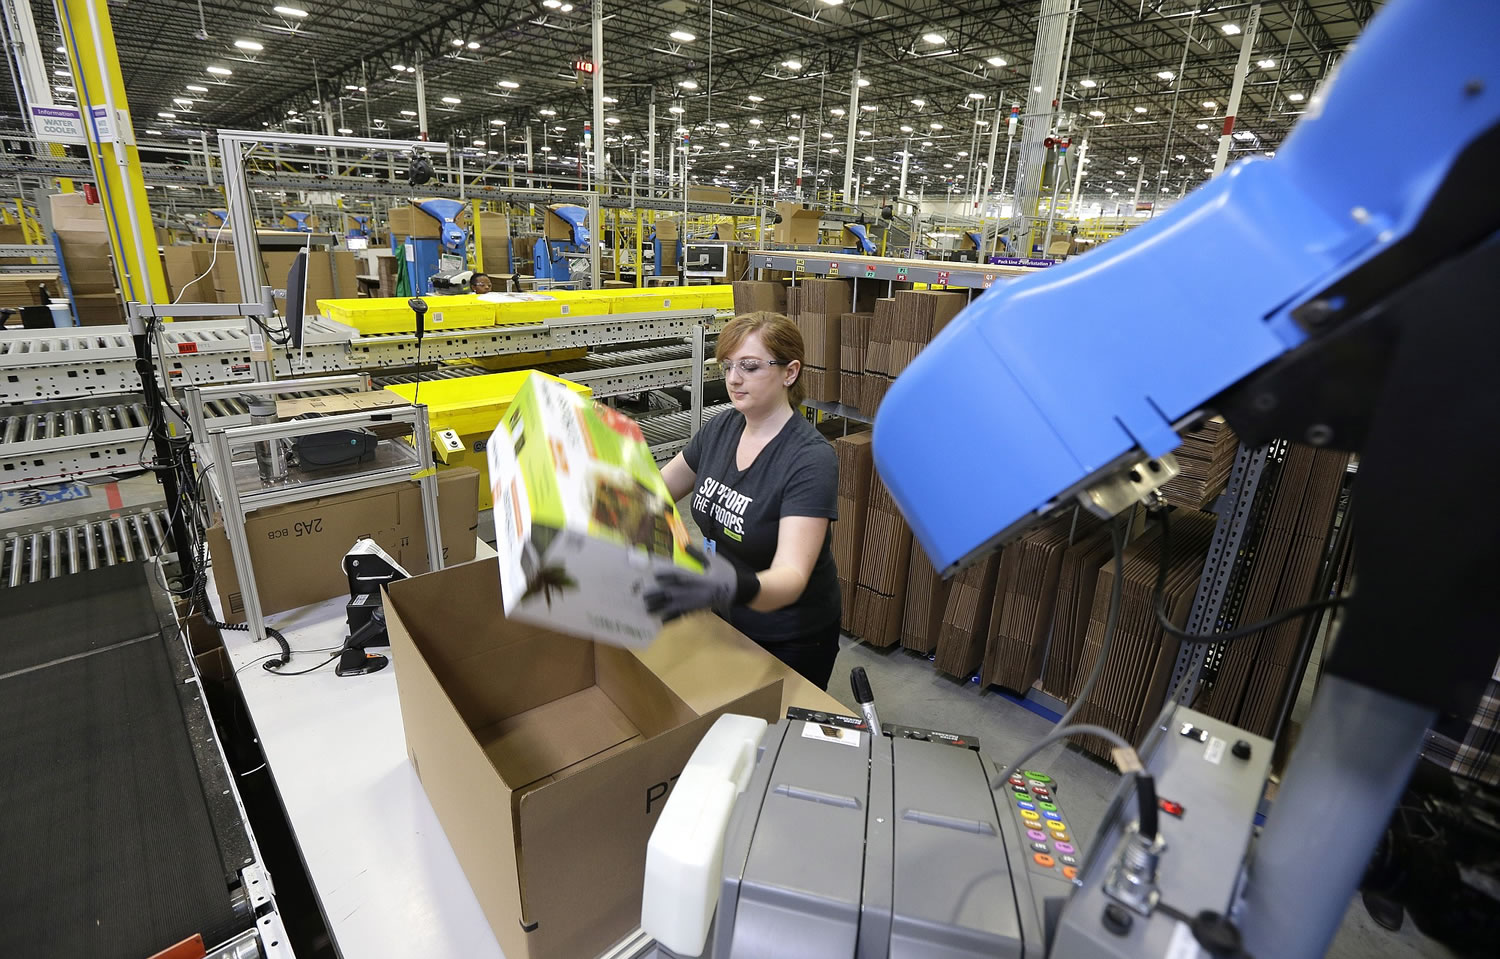 A worker places an item in a box for shipment Friday during a media tour of the new Amazon.com fulfillment center in DuPont.